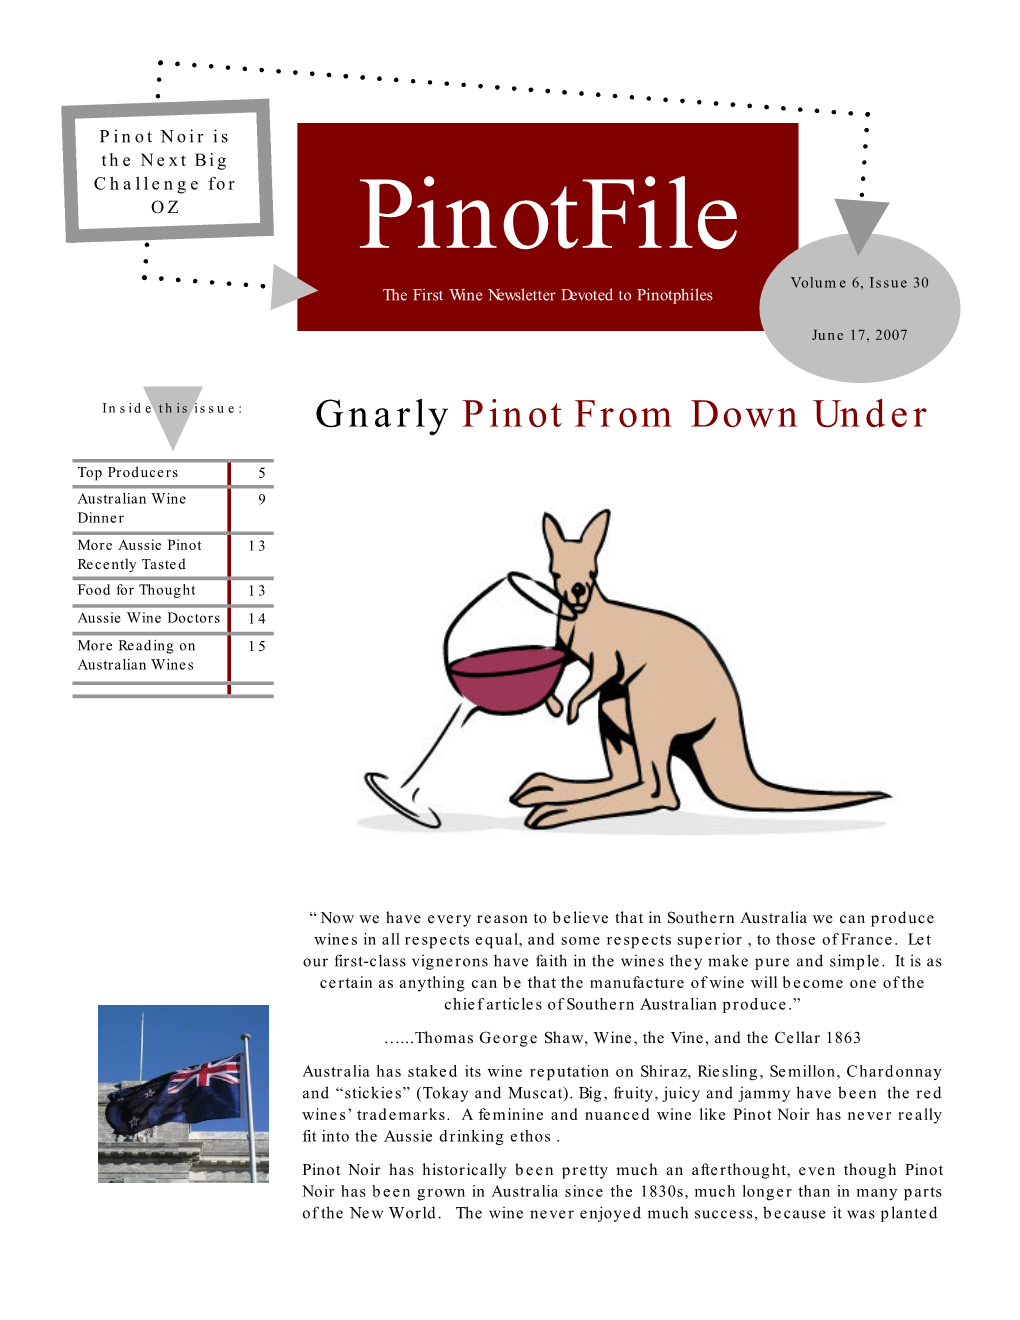 Pinotfile Volume 6, Issue 30 the First Wine Newsletter Devoted to Pinotphiles